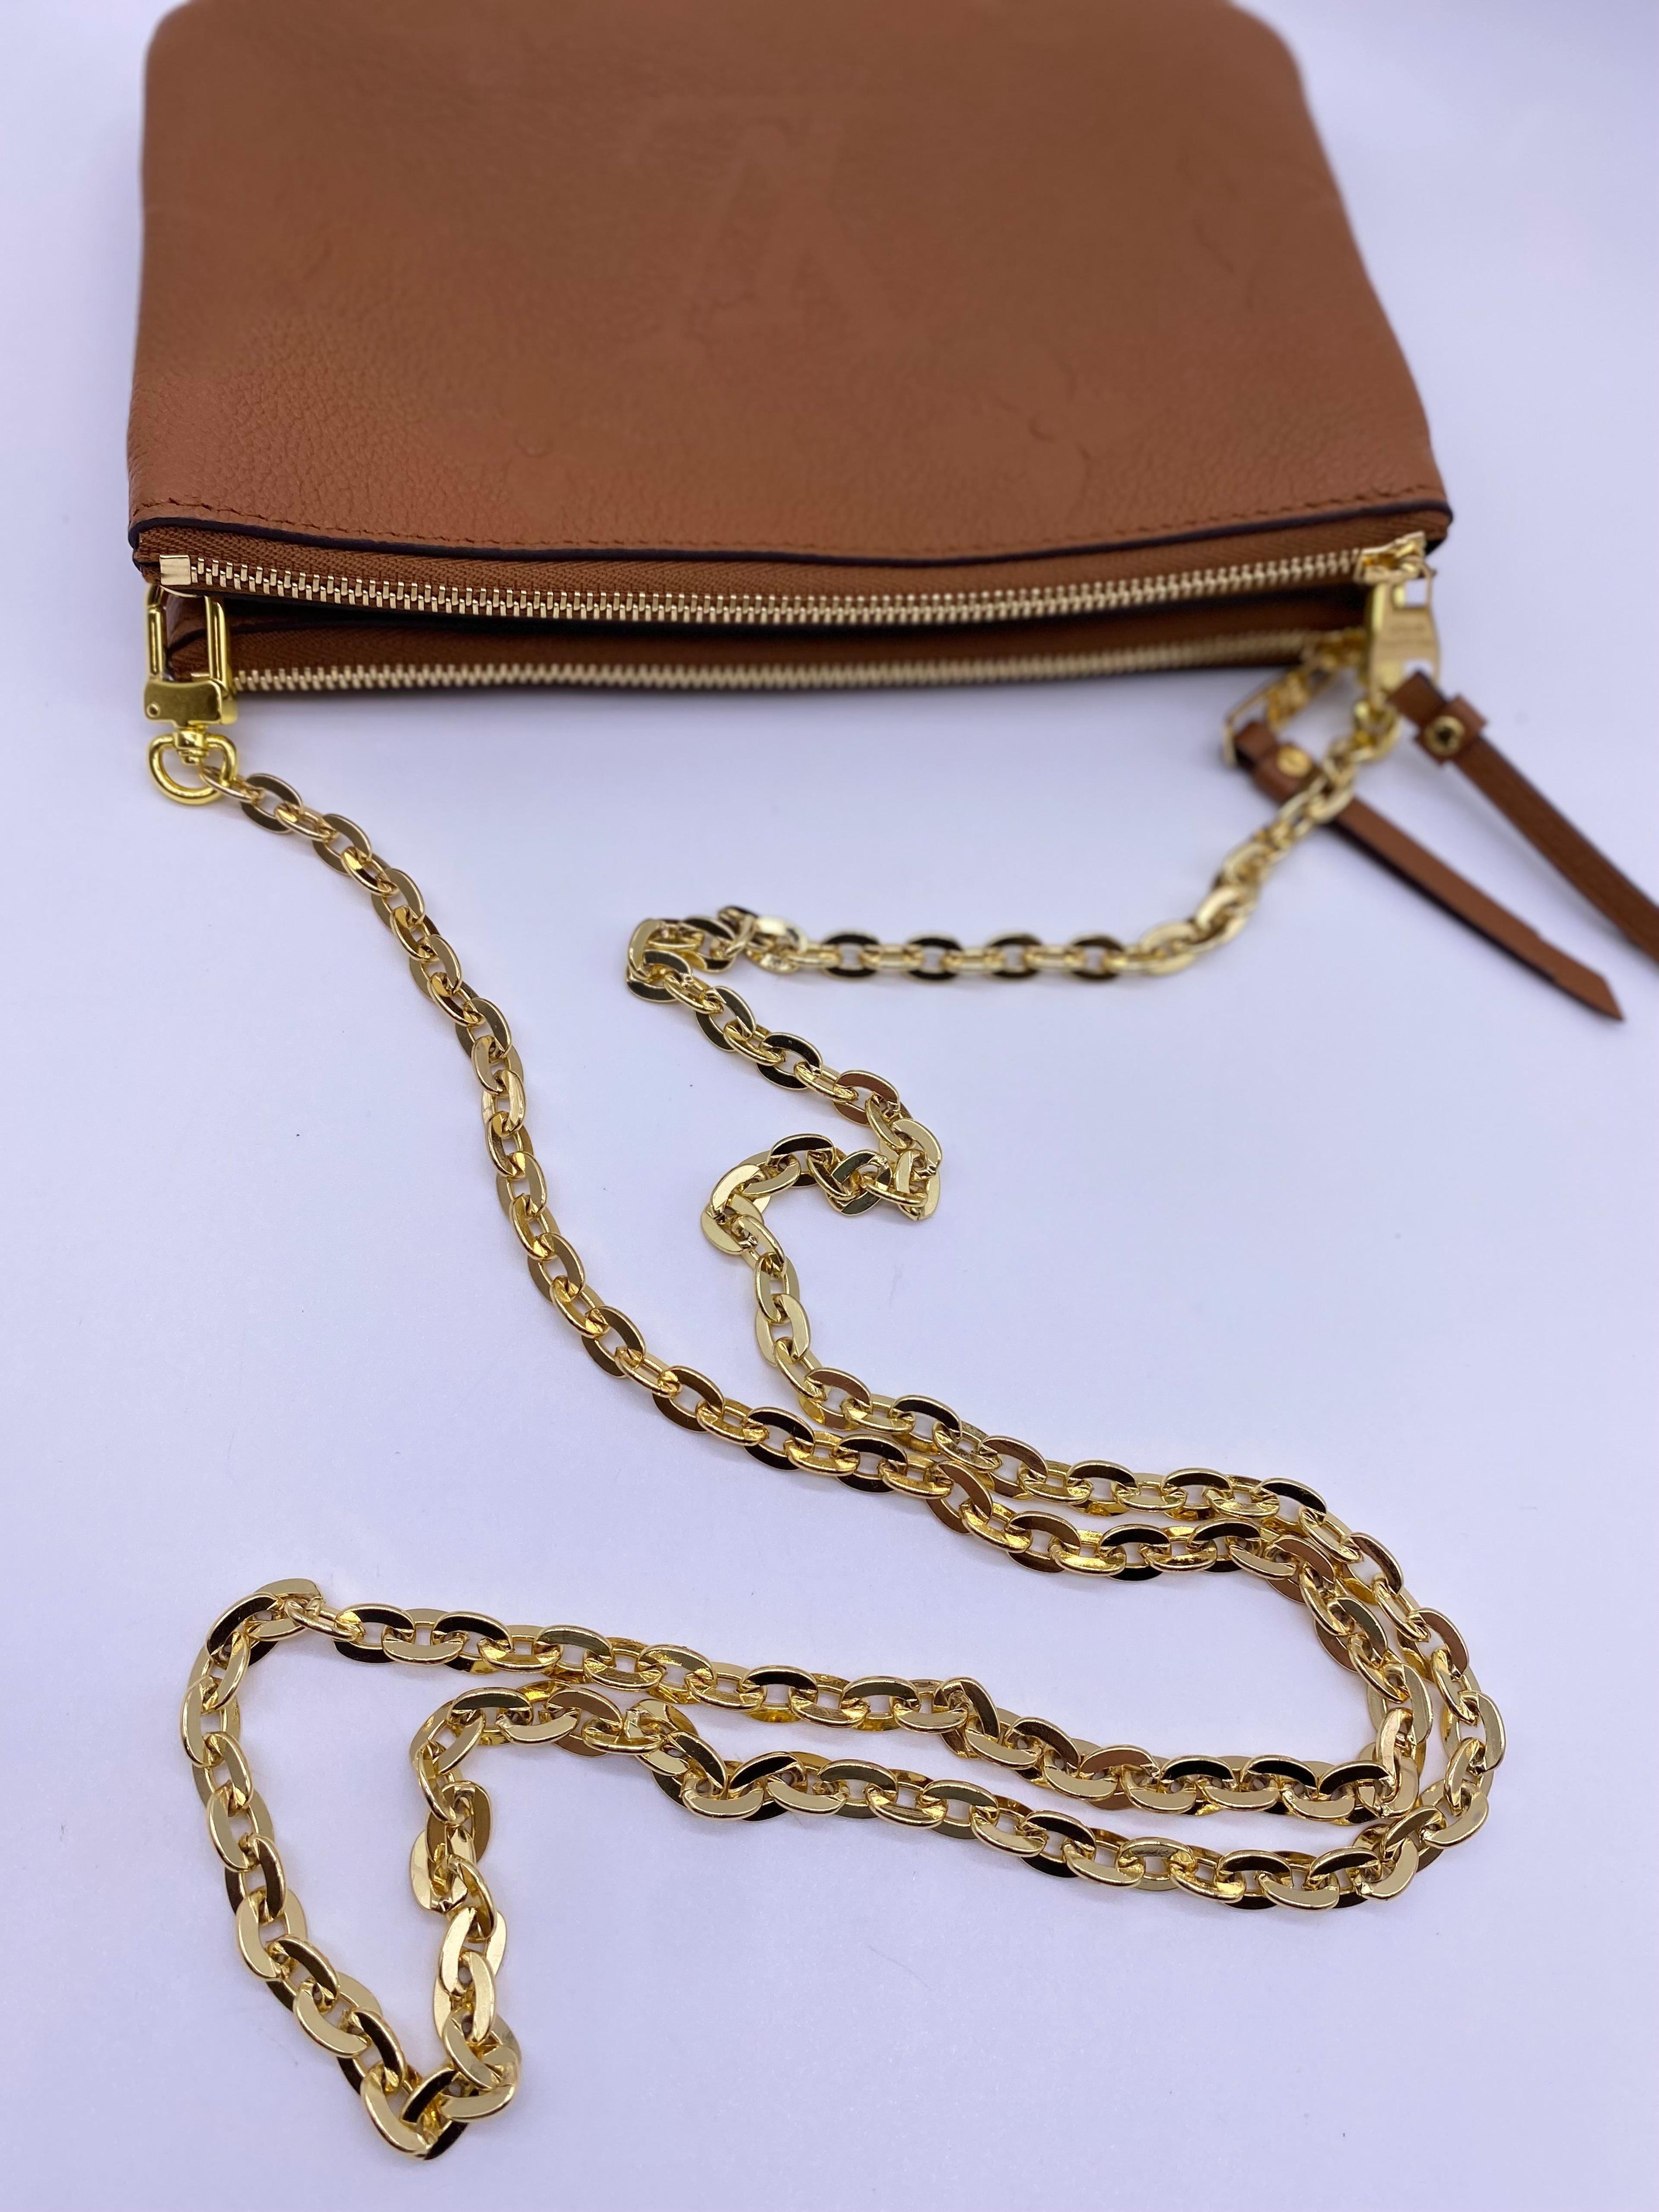 KimmieBBags LLC New Metal Purse Chain Straps Short 23.75 and Long 47 - Various Lengths 23.5” Silver Chain Strap Length Short